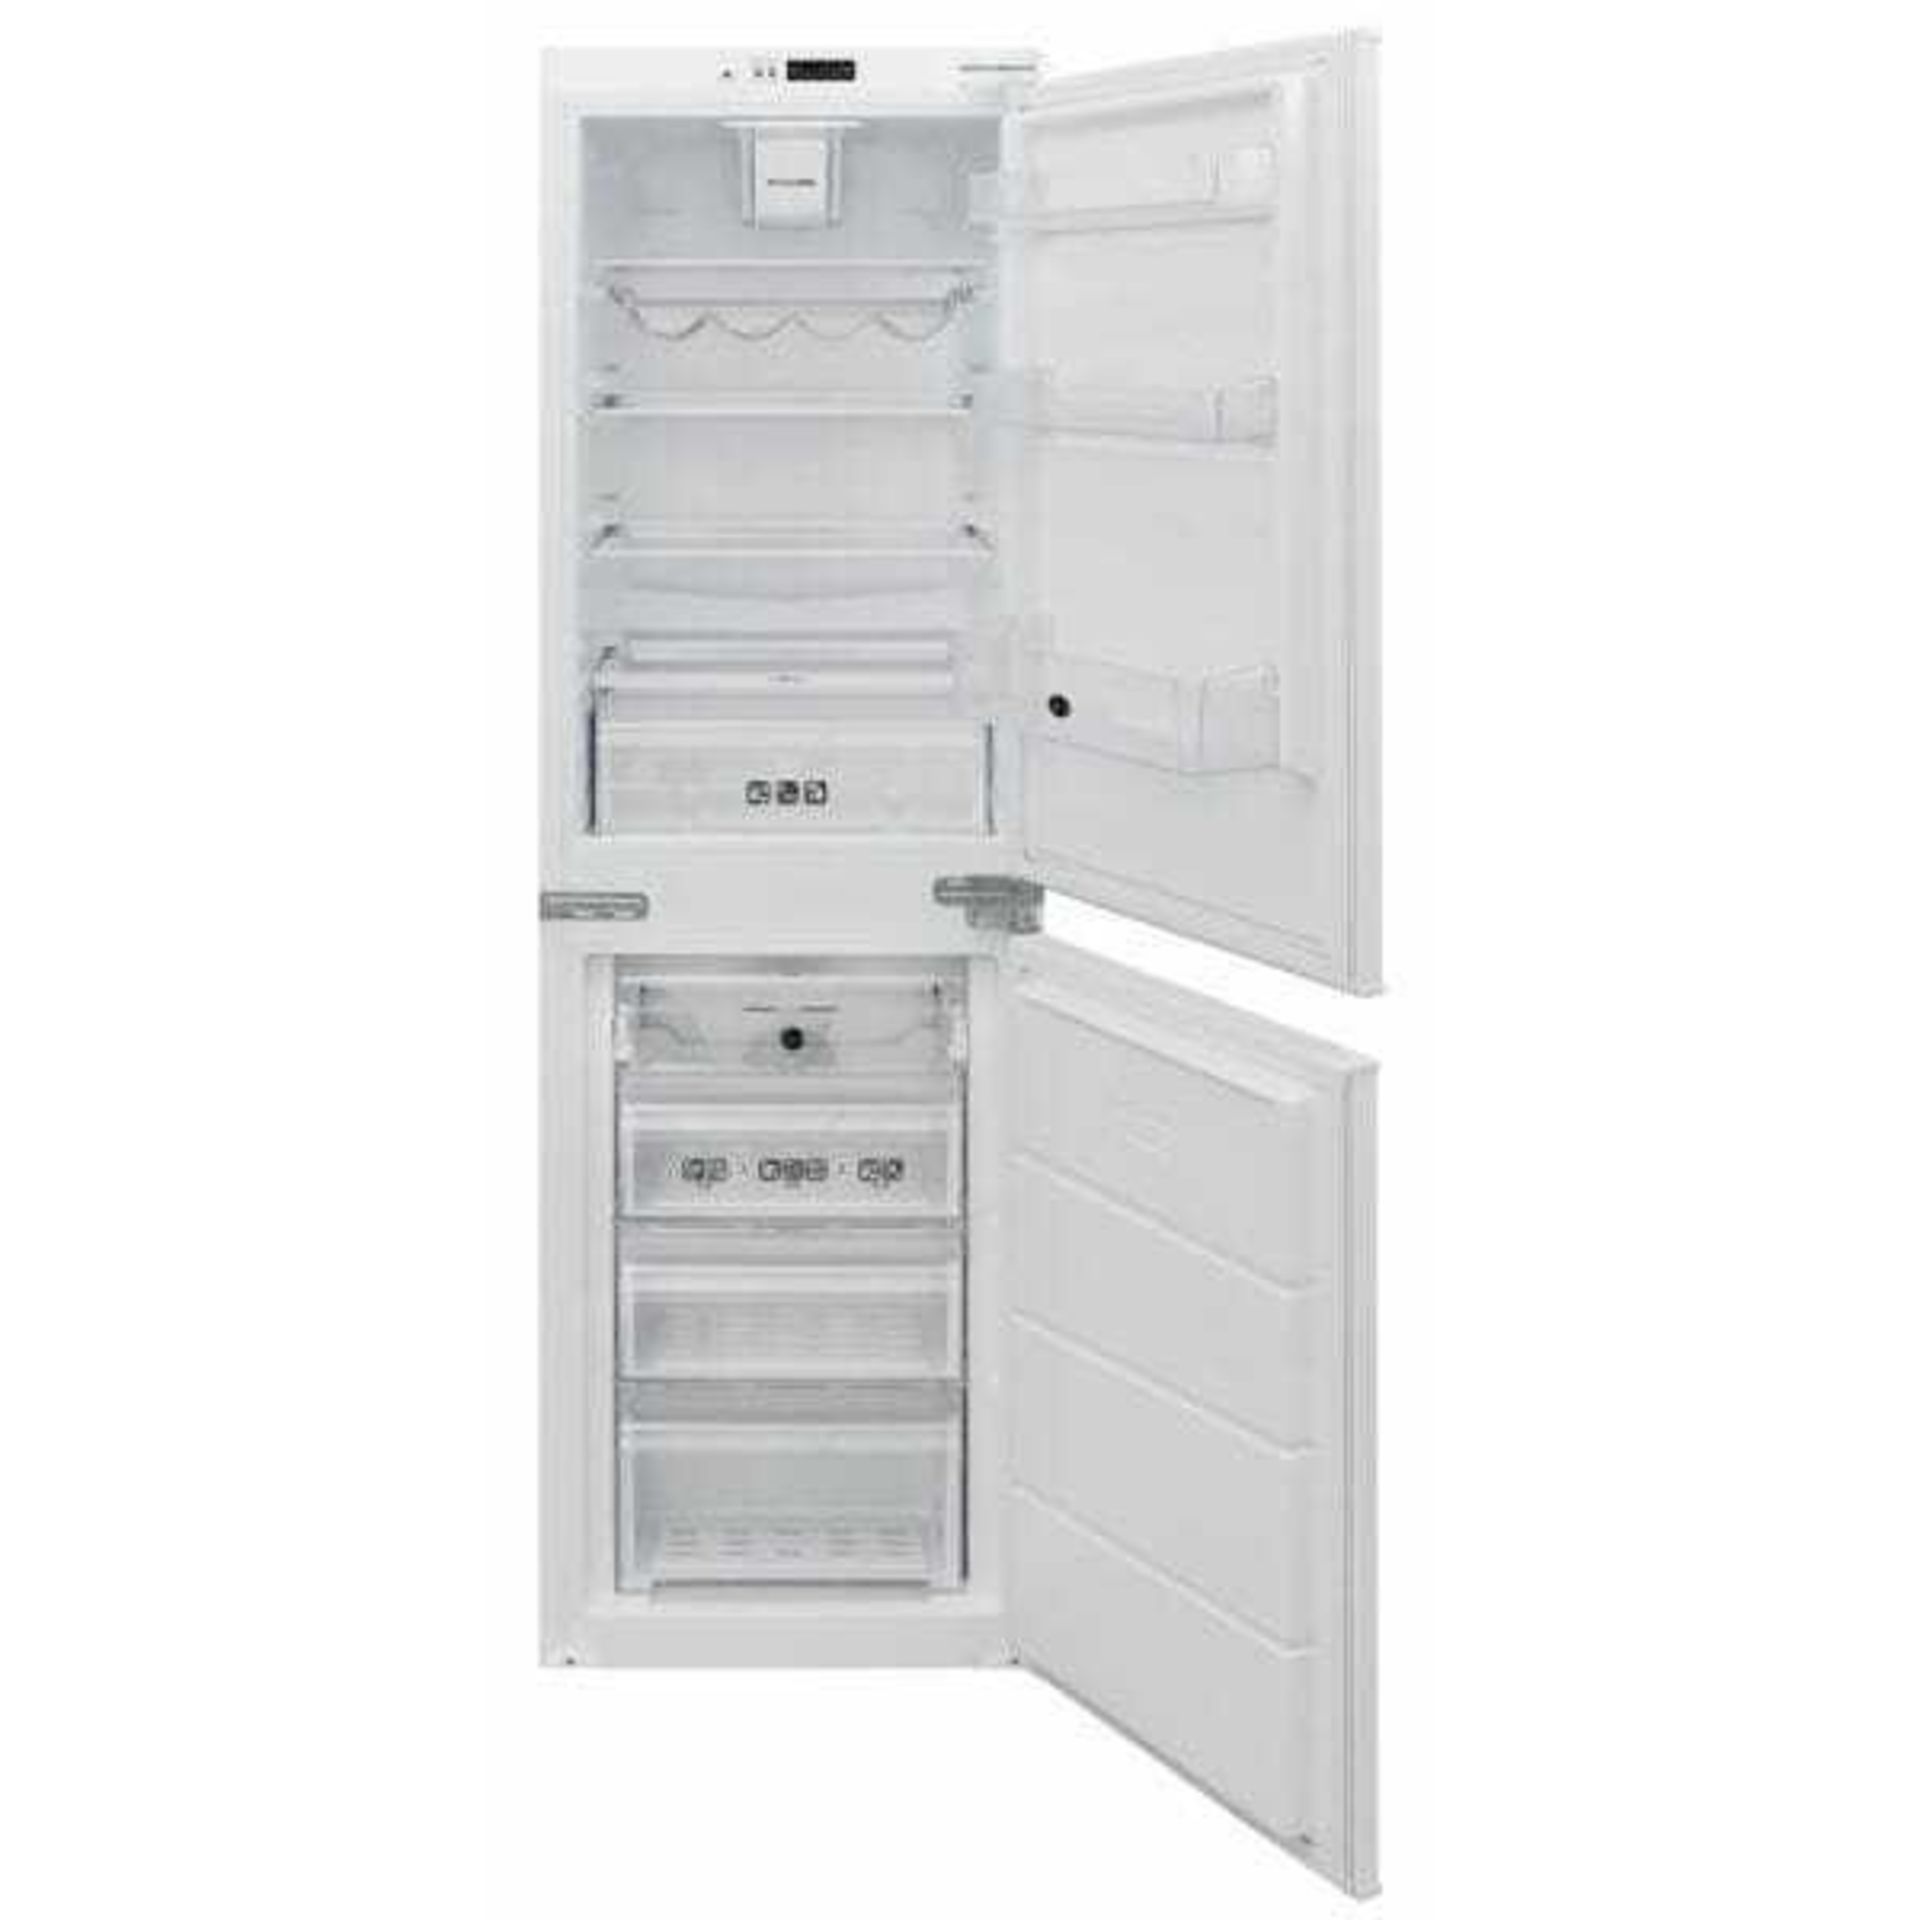 (Kw) RRP £290 Lot To Contain X1 Integrated Fridge Freezer, Unboxed - Image 2 of 4